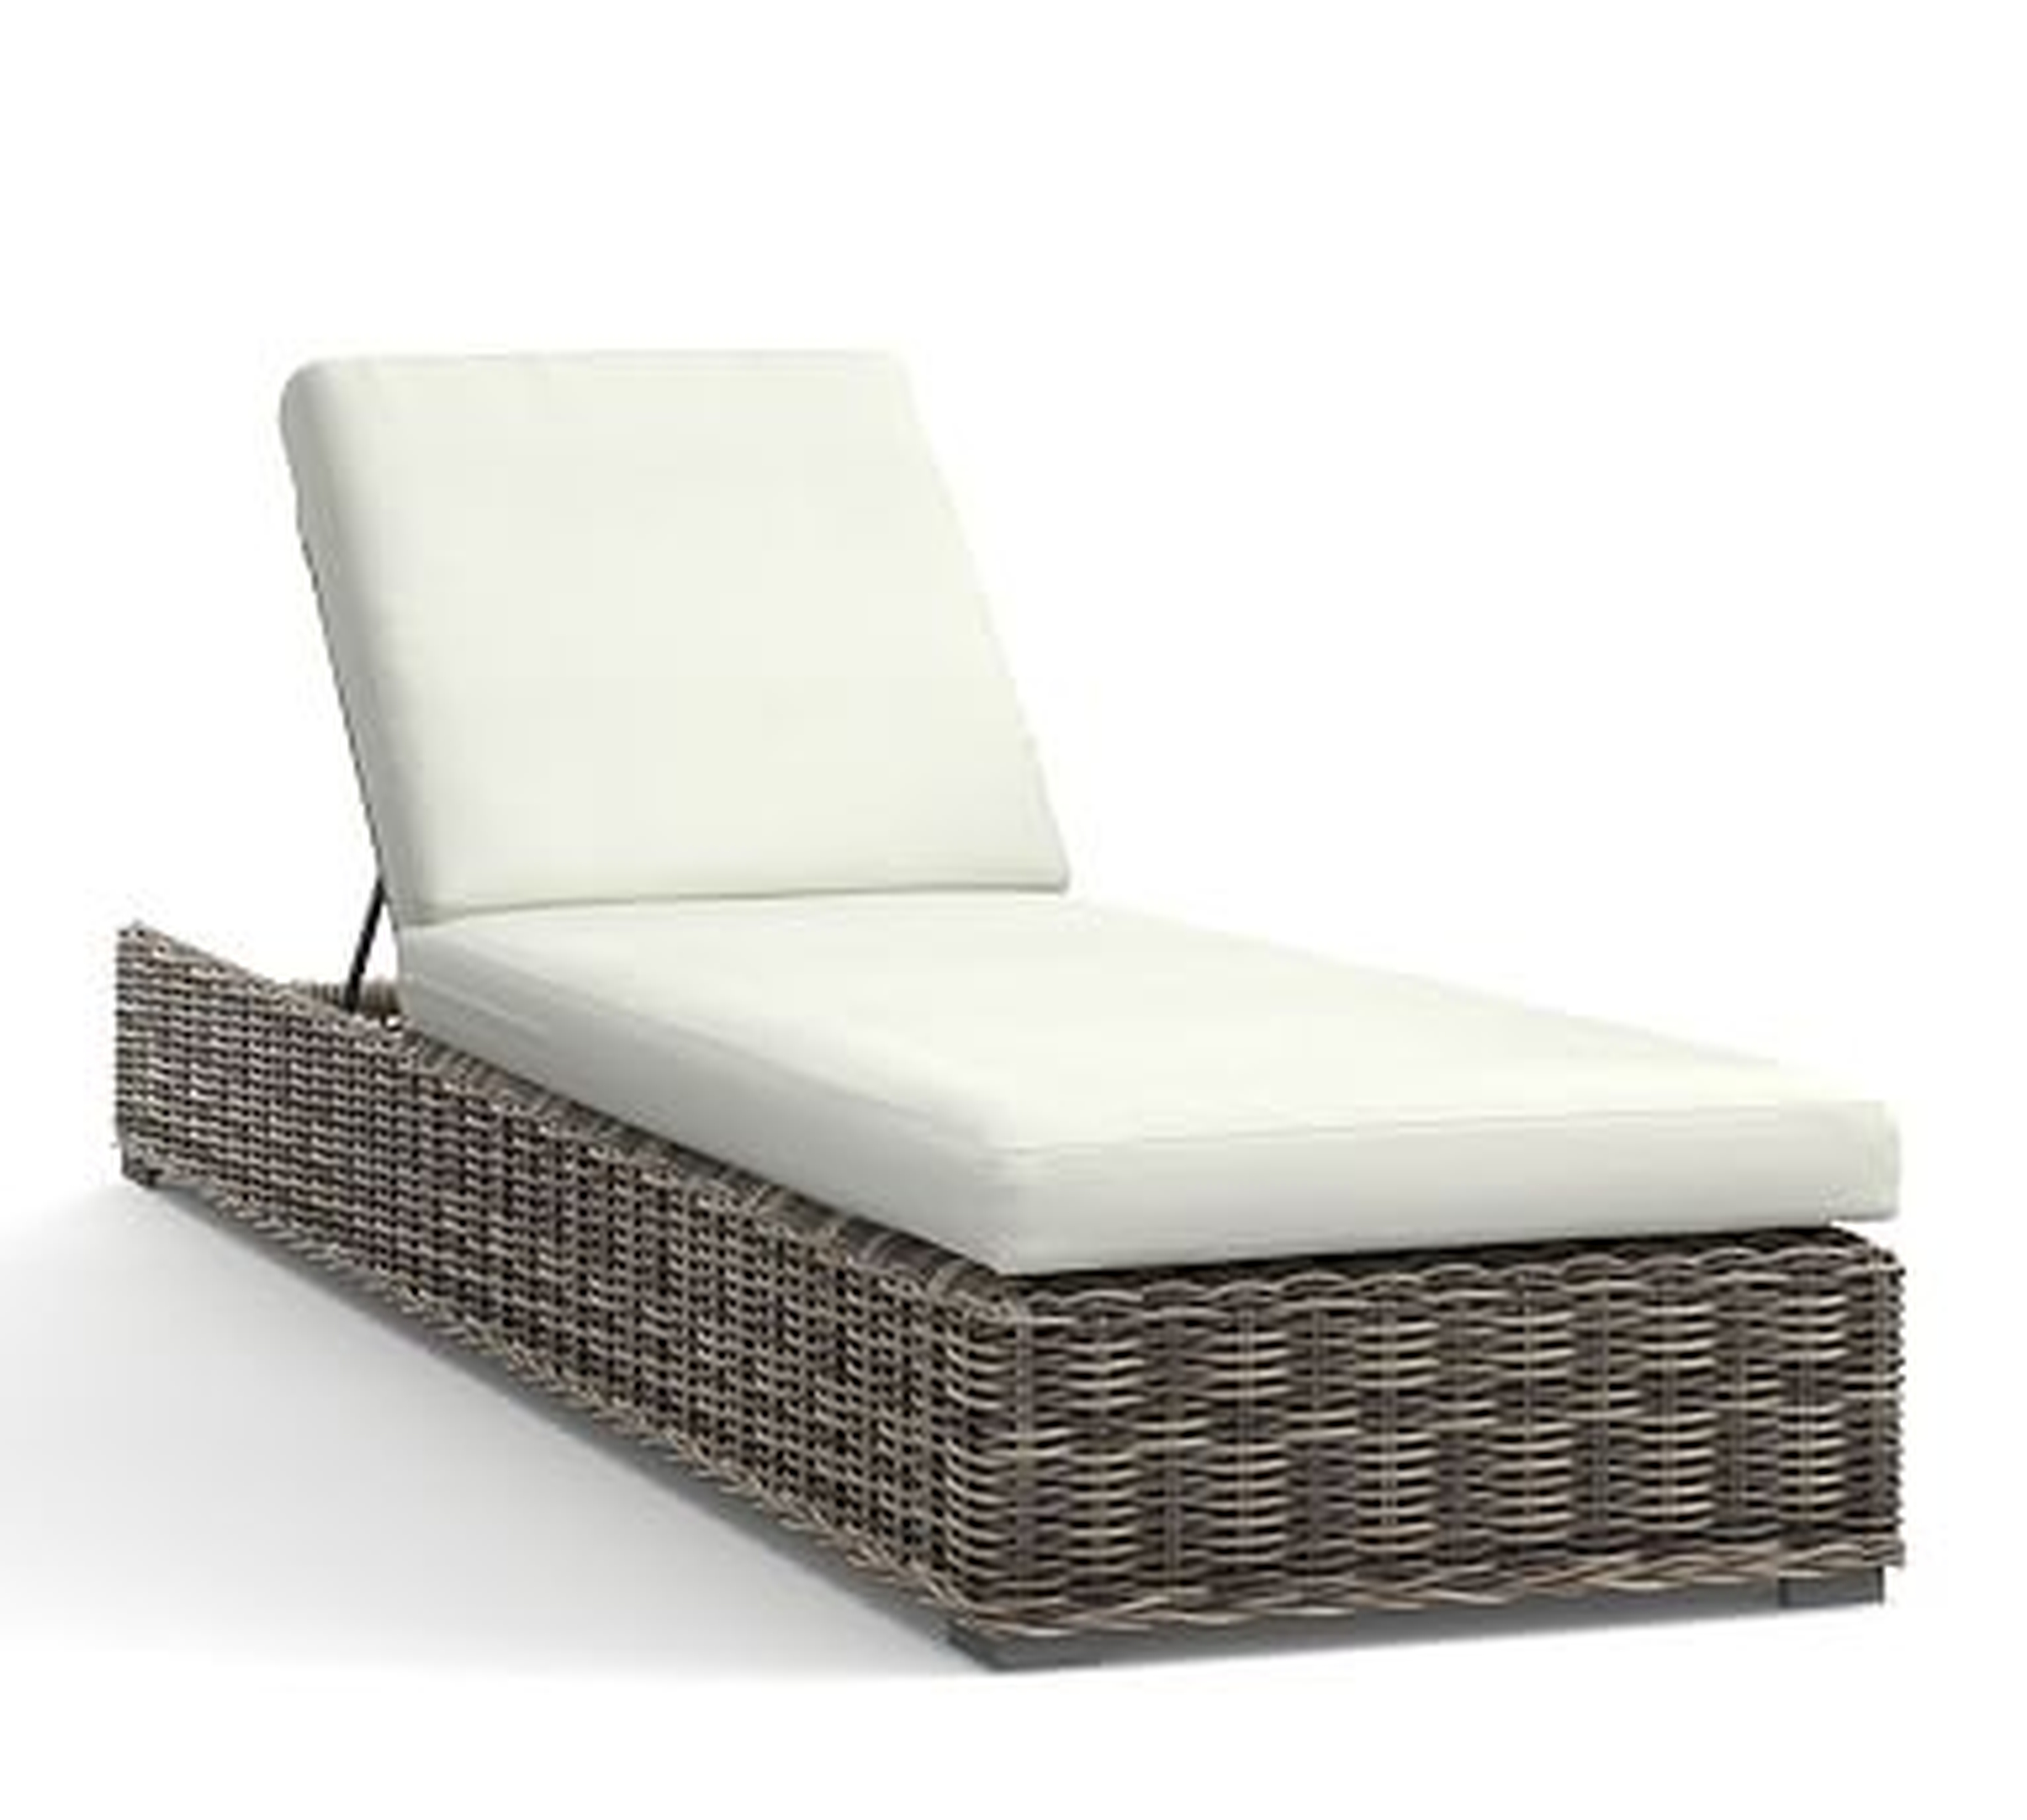 Huntington All-Weather Wicker Single Chaise - Frame only - Pottery Barn